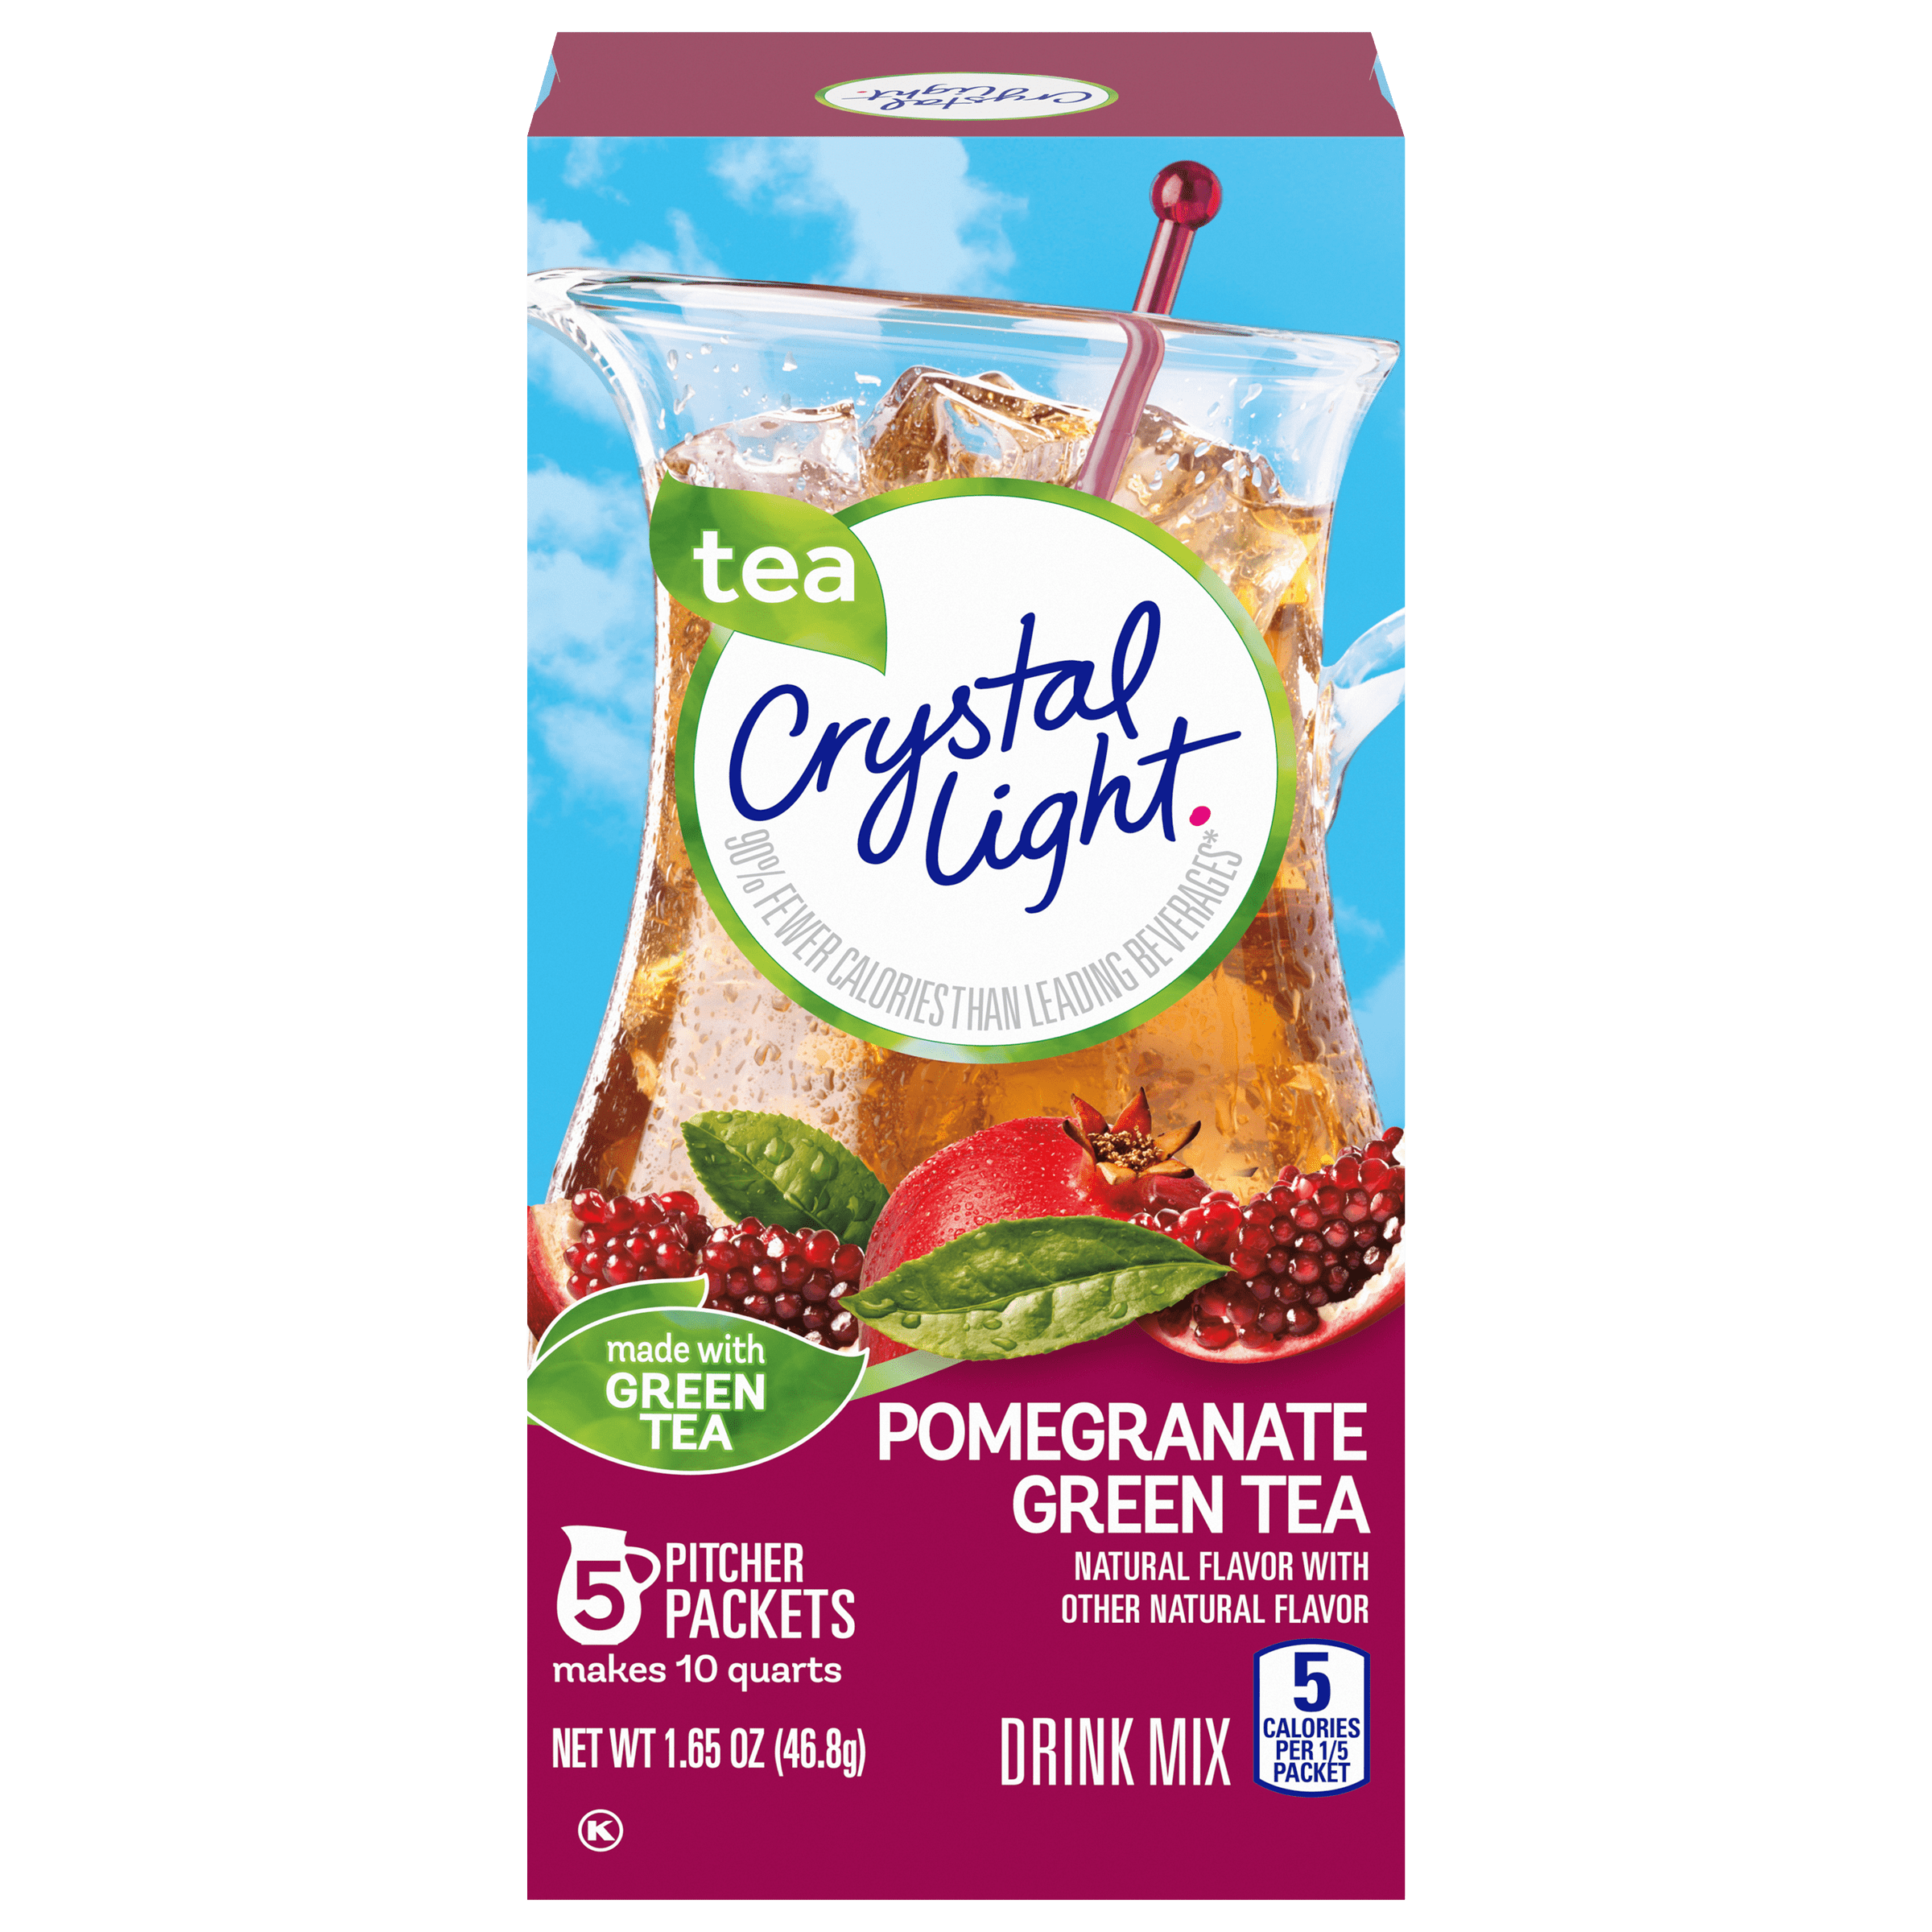 Pomegranate Green Tea Naturally Flavored Powdered Drink Mix